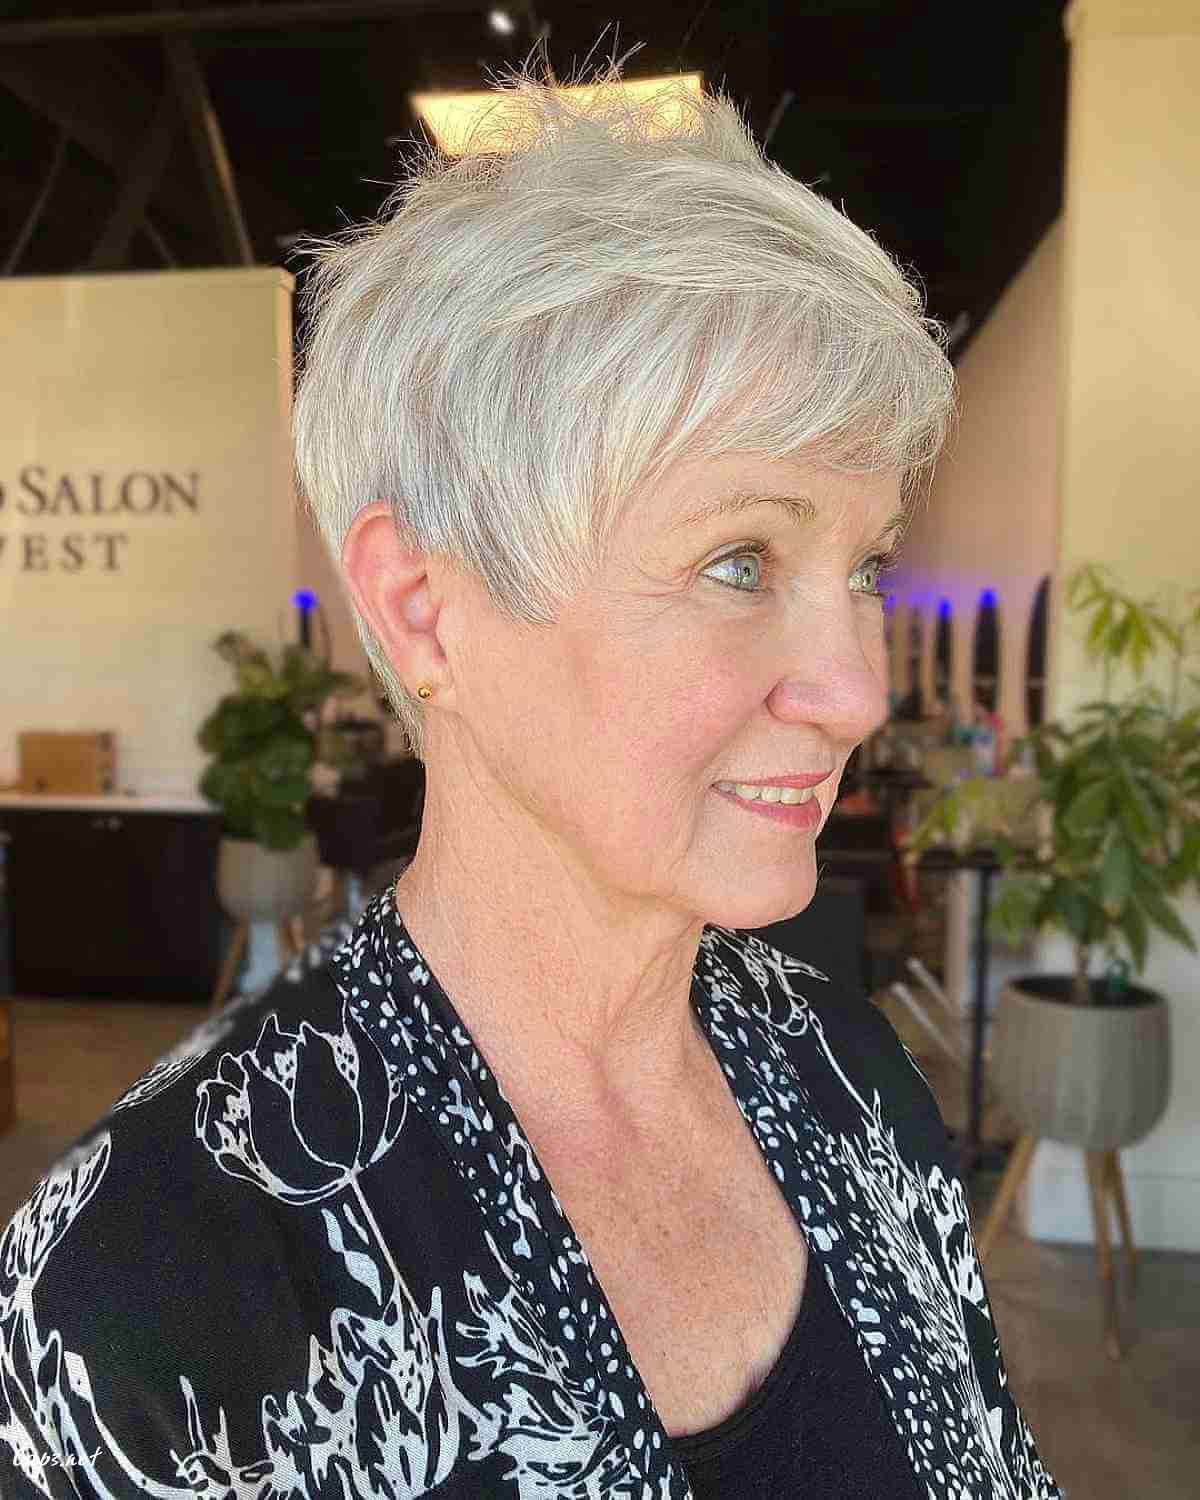 the white pixie cut and color